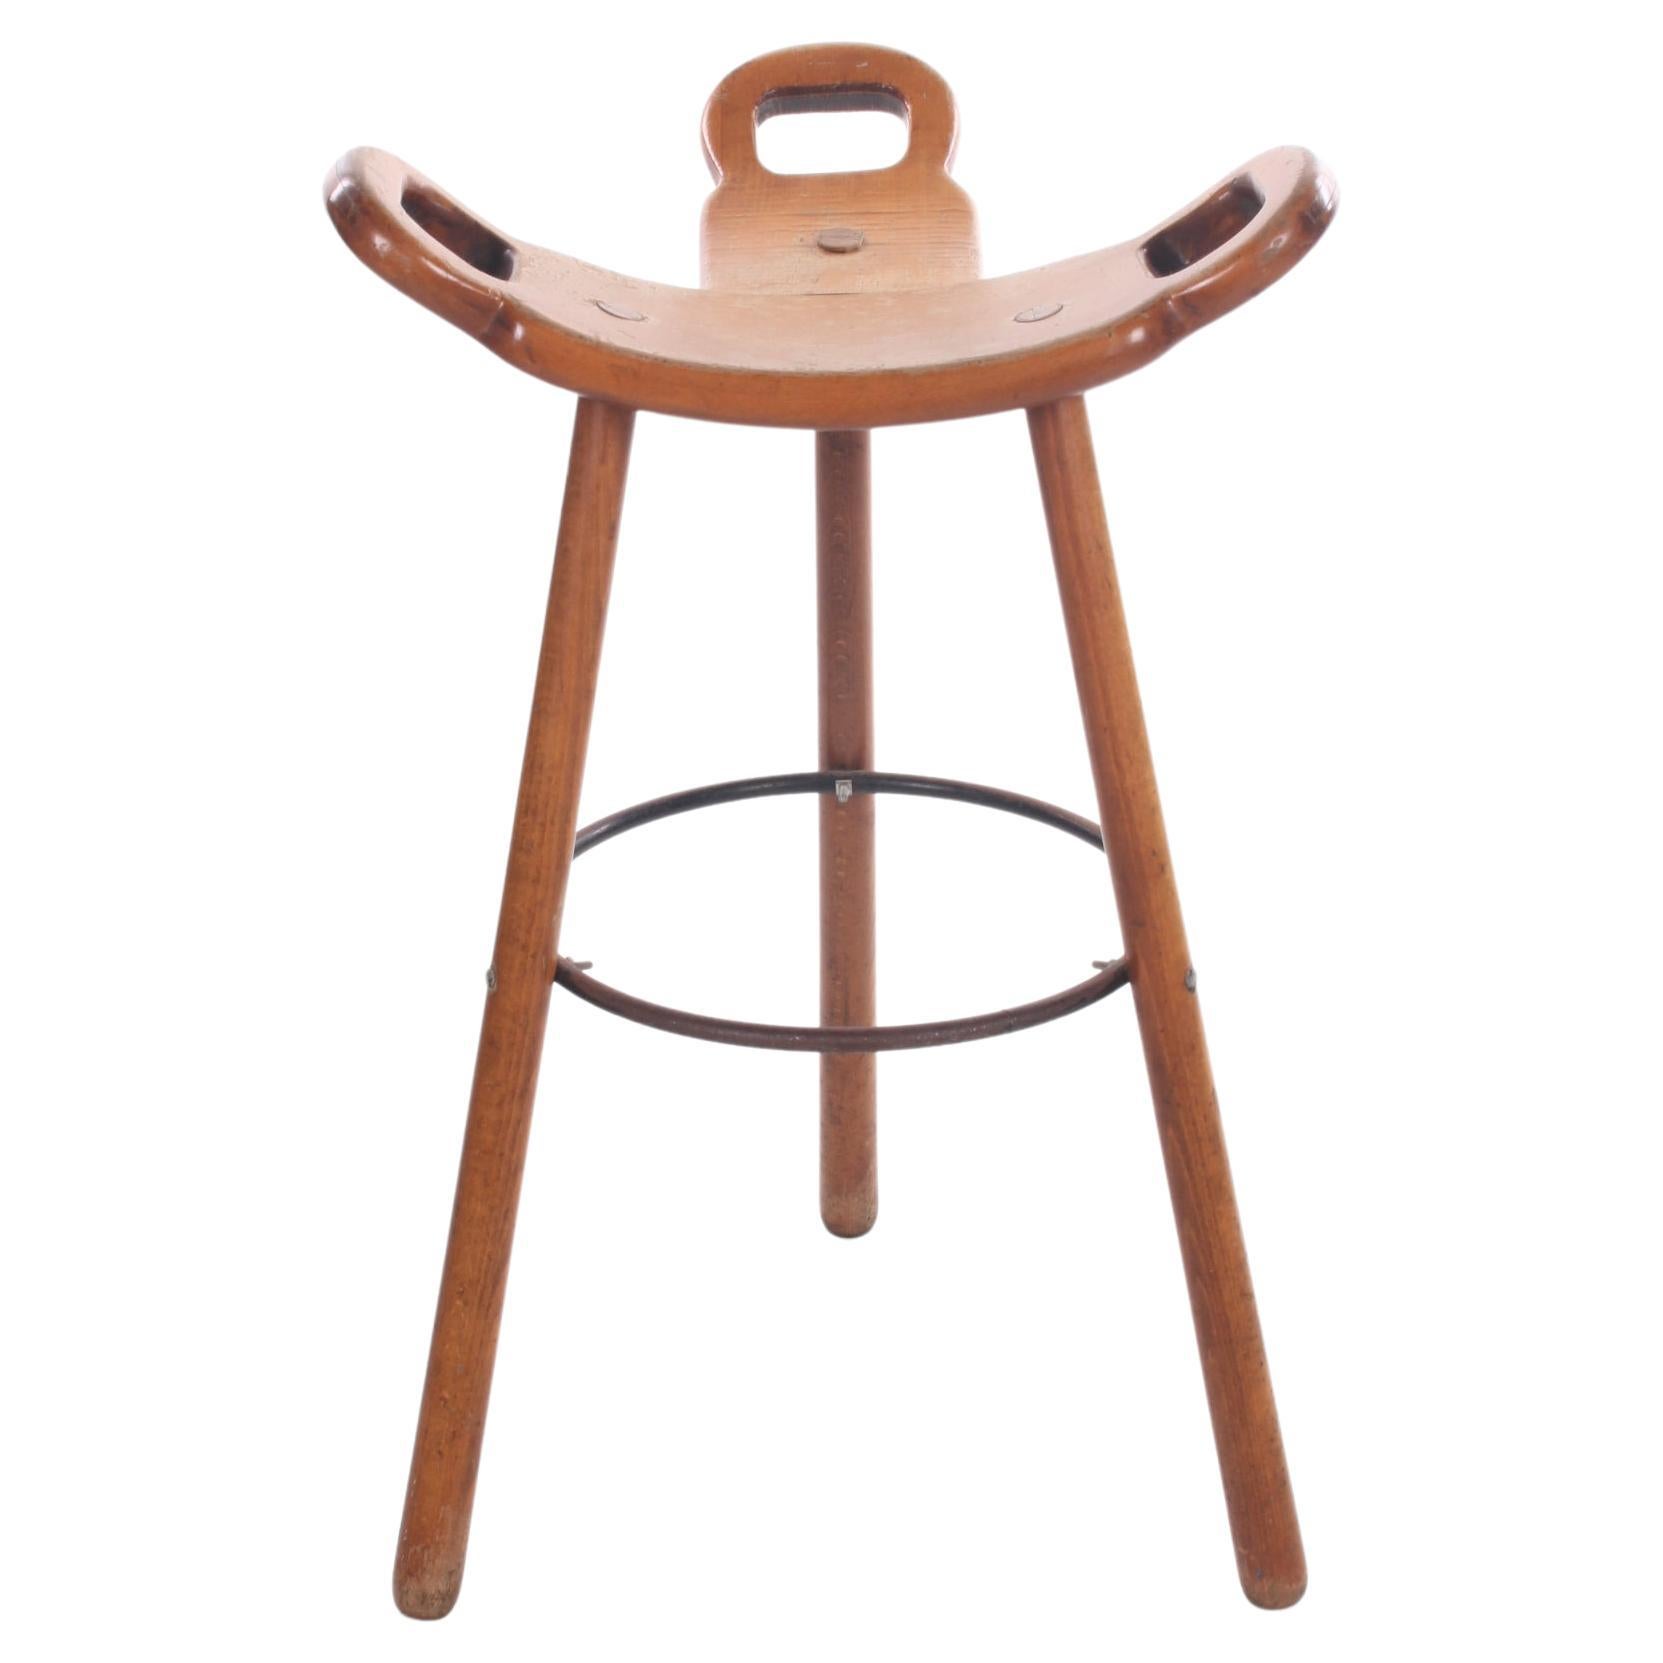 Spanish Brutalist Barstool Marbella for Confonorm, 1970s